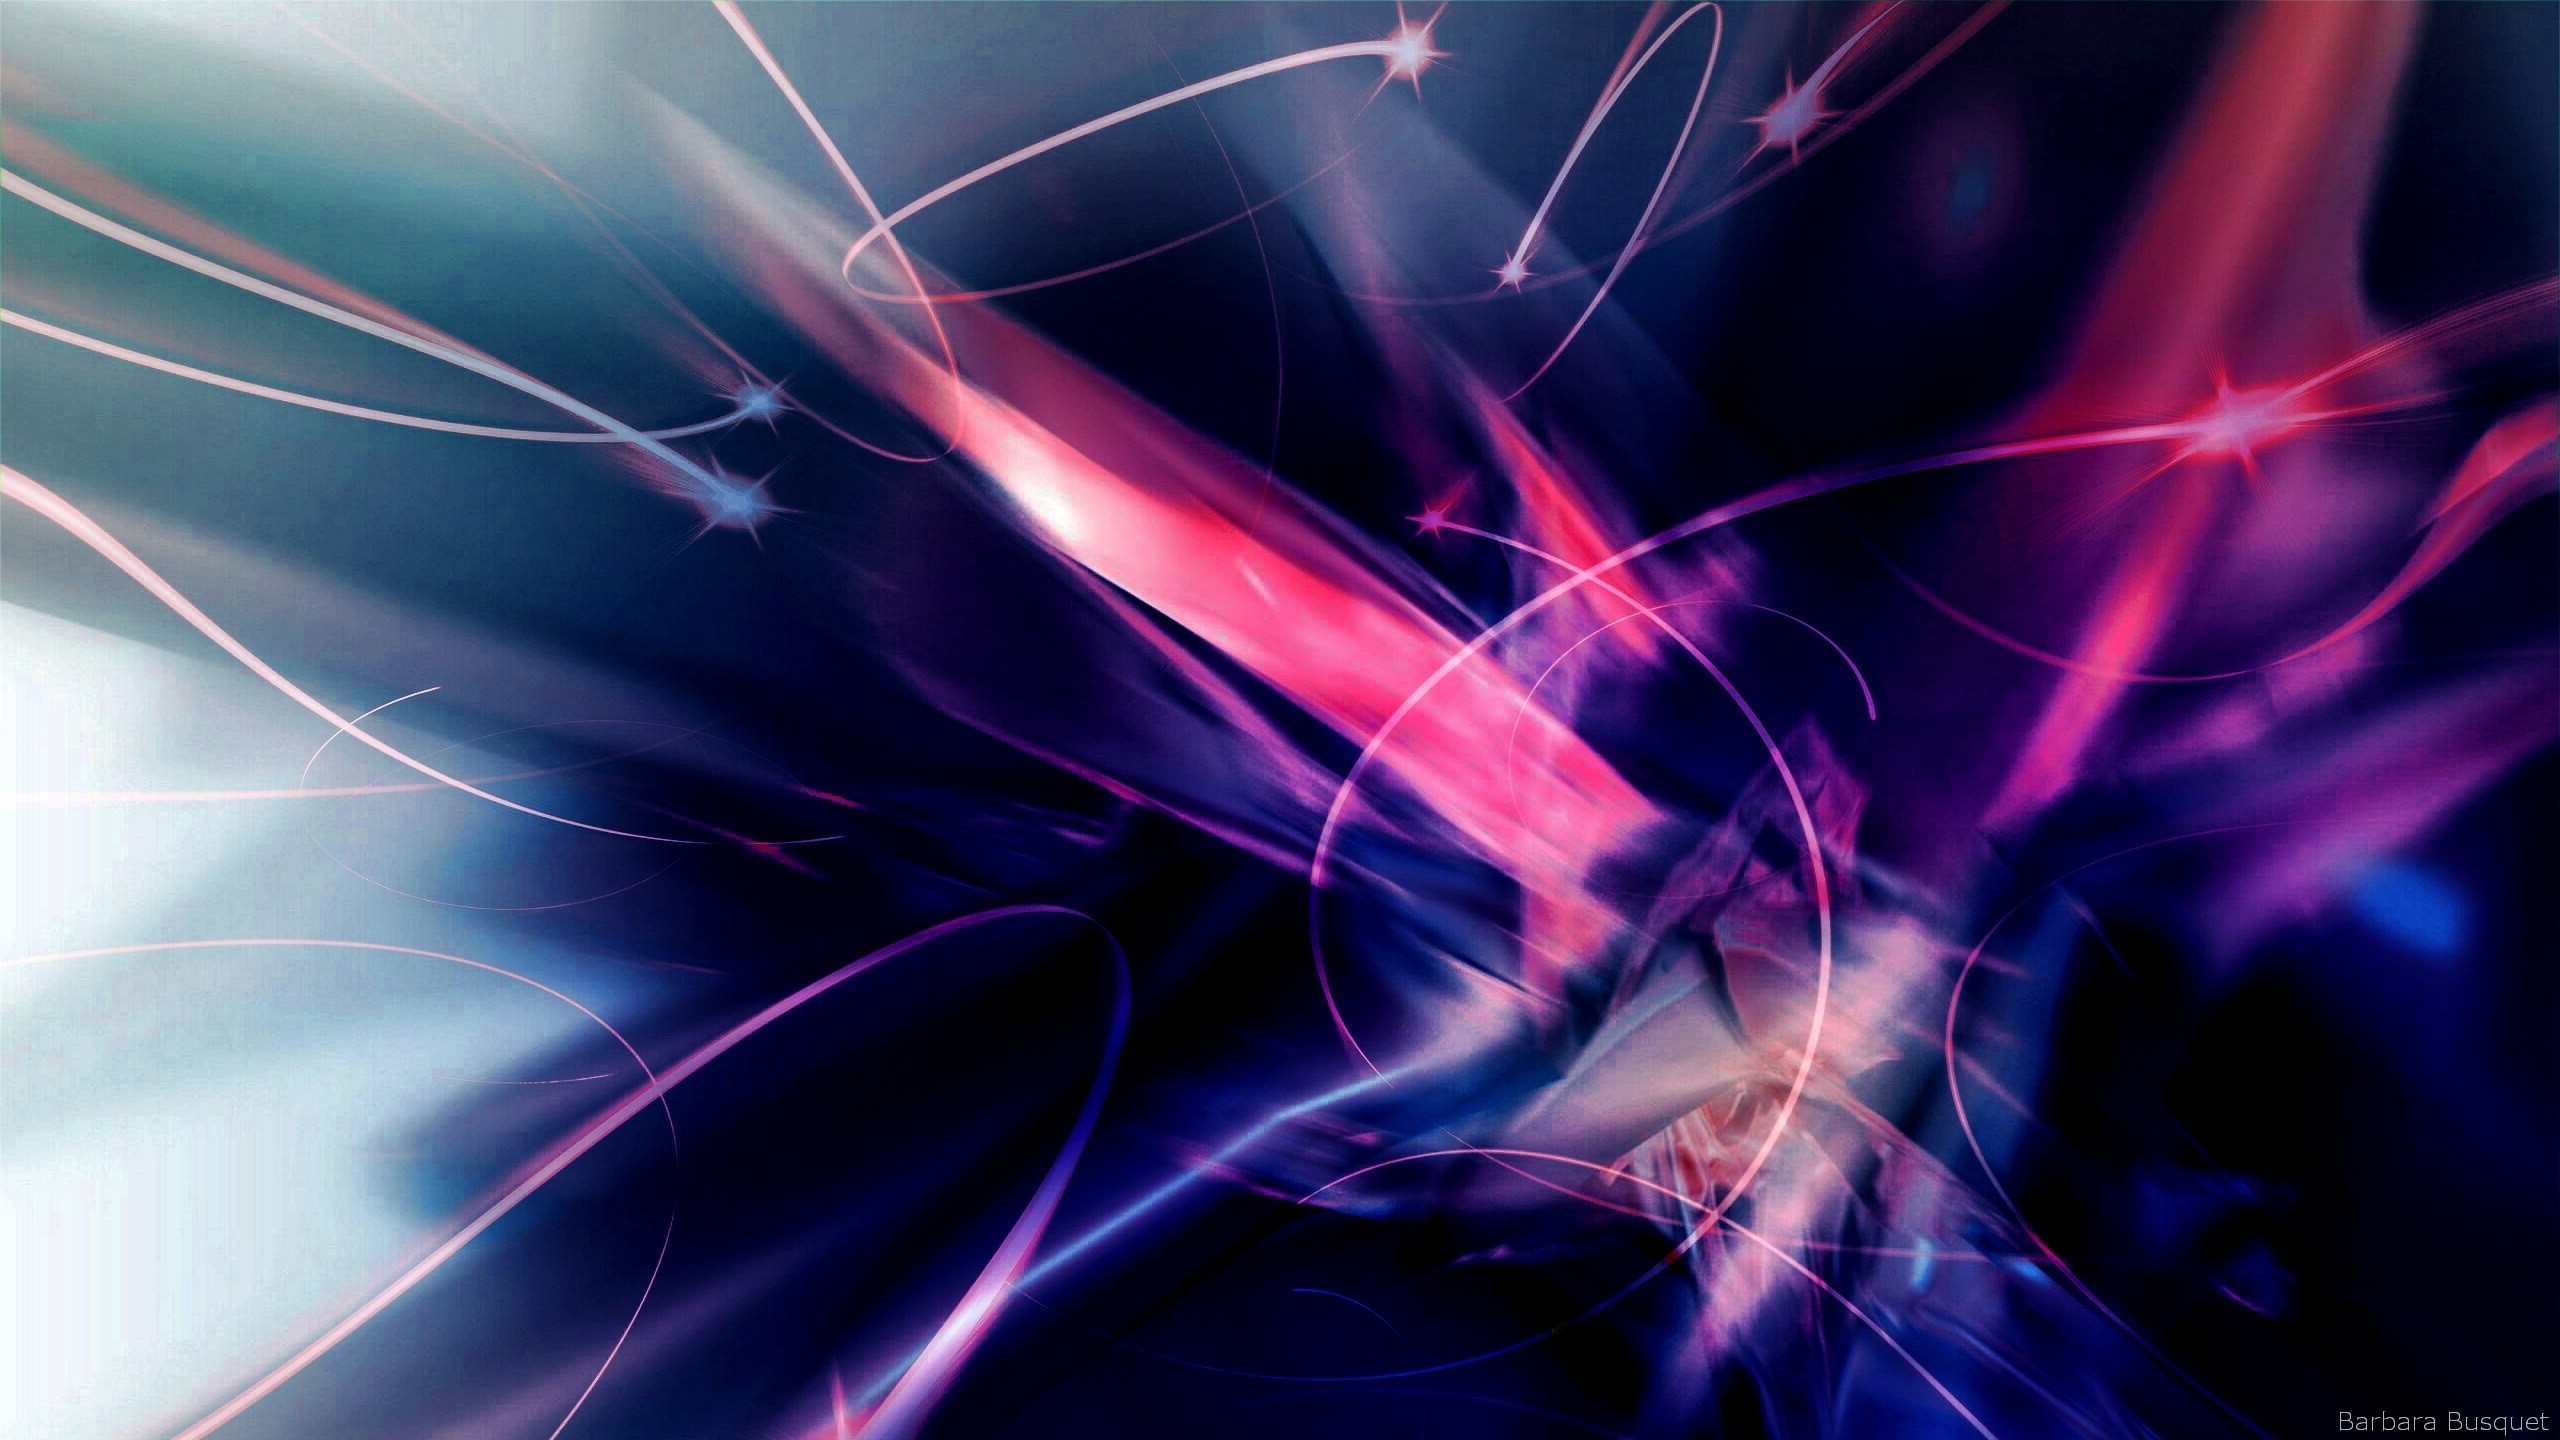 2560x1440 Abstract wallpaper in purple and blue colors